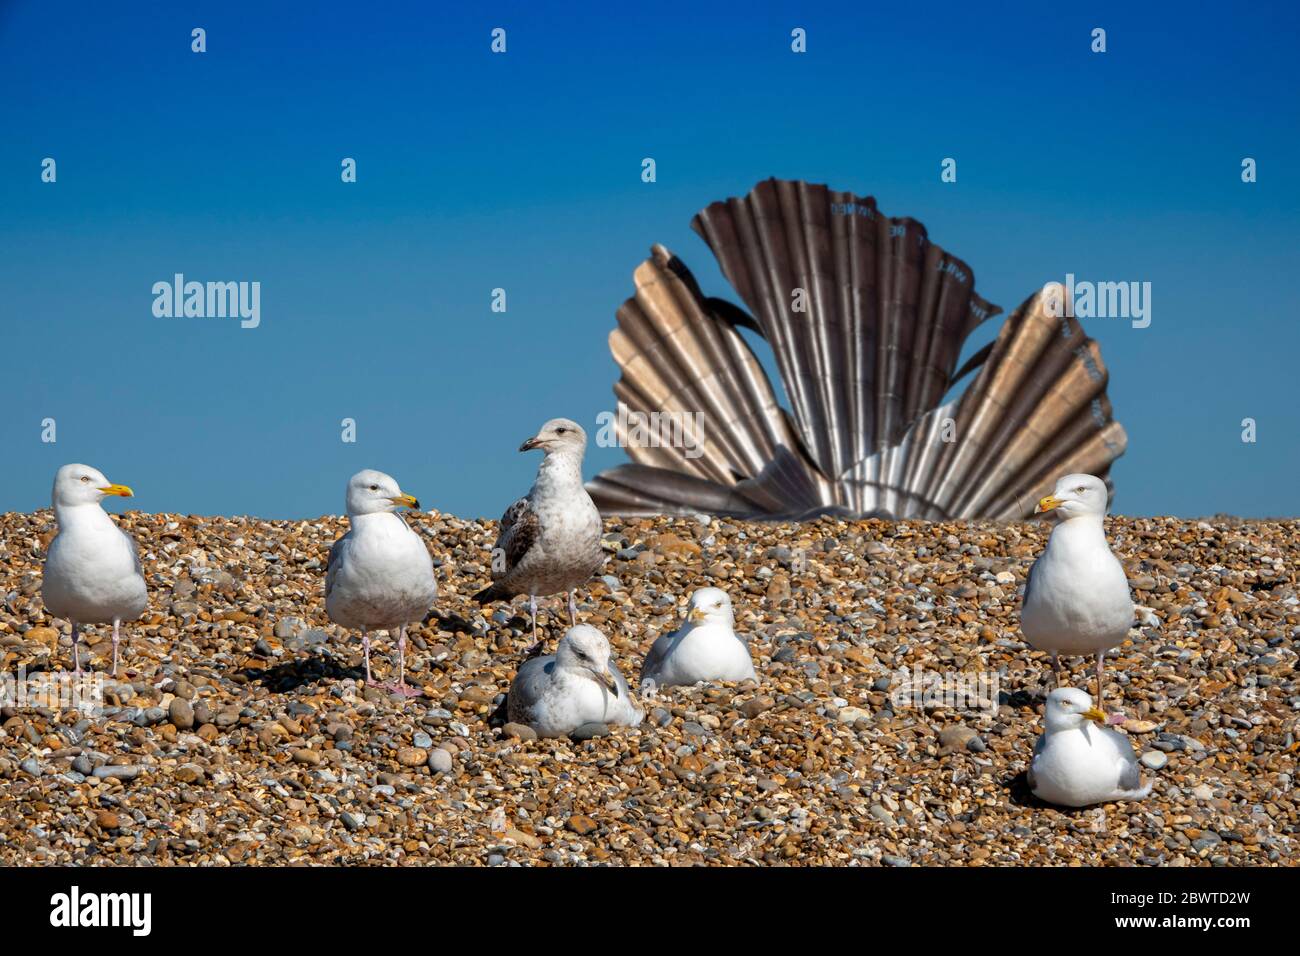 Seven gulls sitting on a shingle beach at Aldeburgh Suffolk with the Maggi Hambling scallop sculpture in soft focus background against bright blue sky Stock Photo